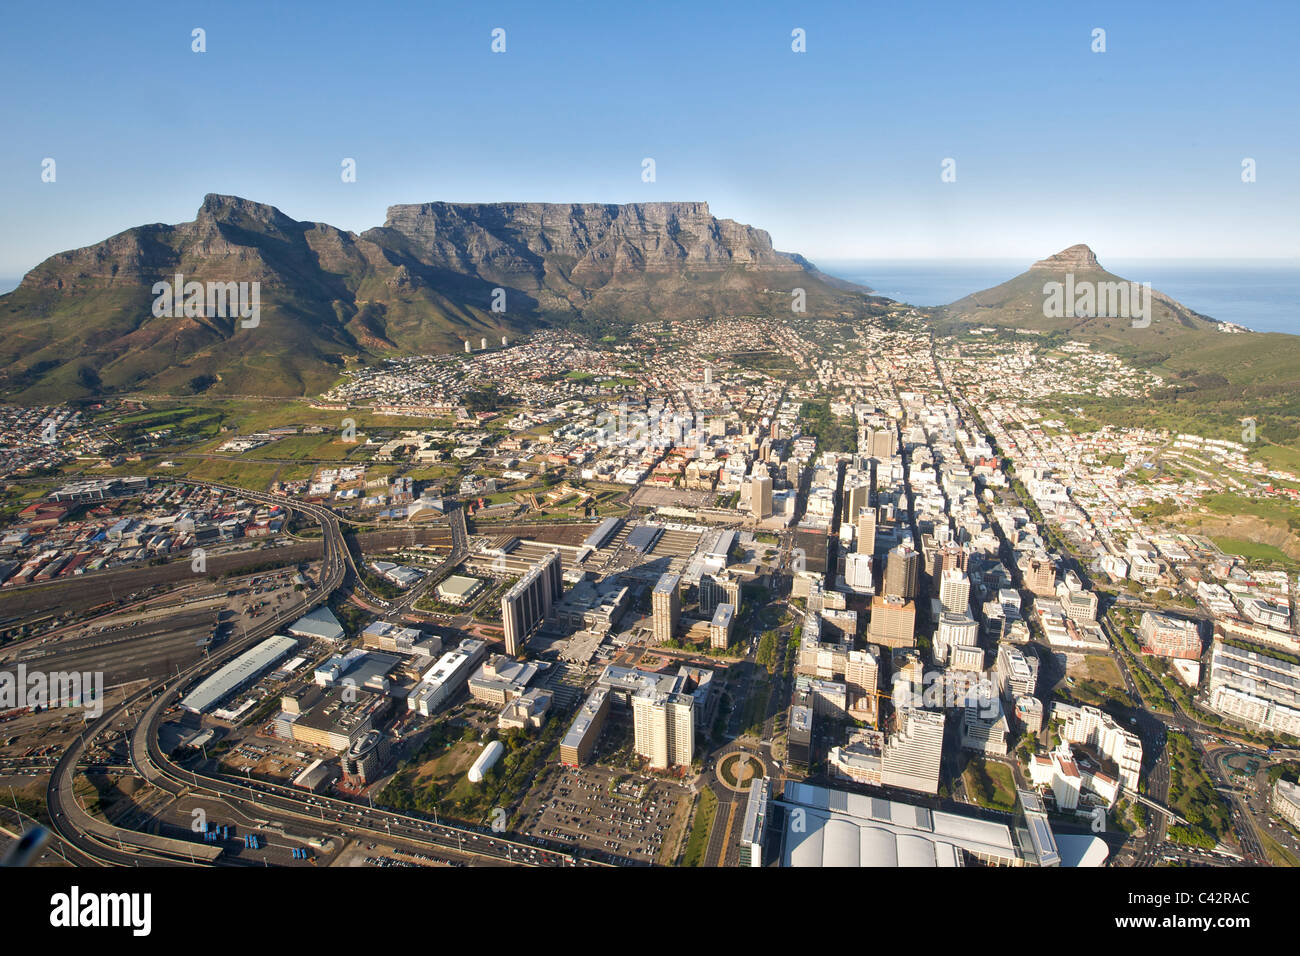 Aerial view of the city of Cape Town, South Africa. Stock Photo